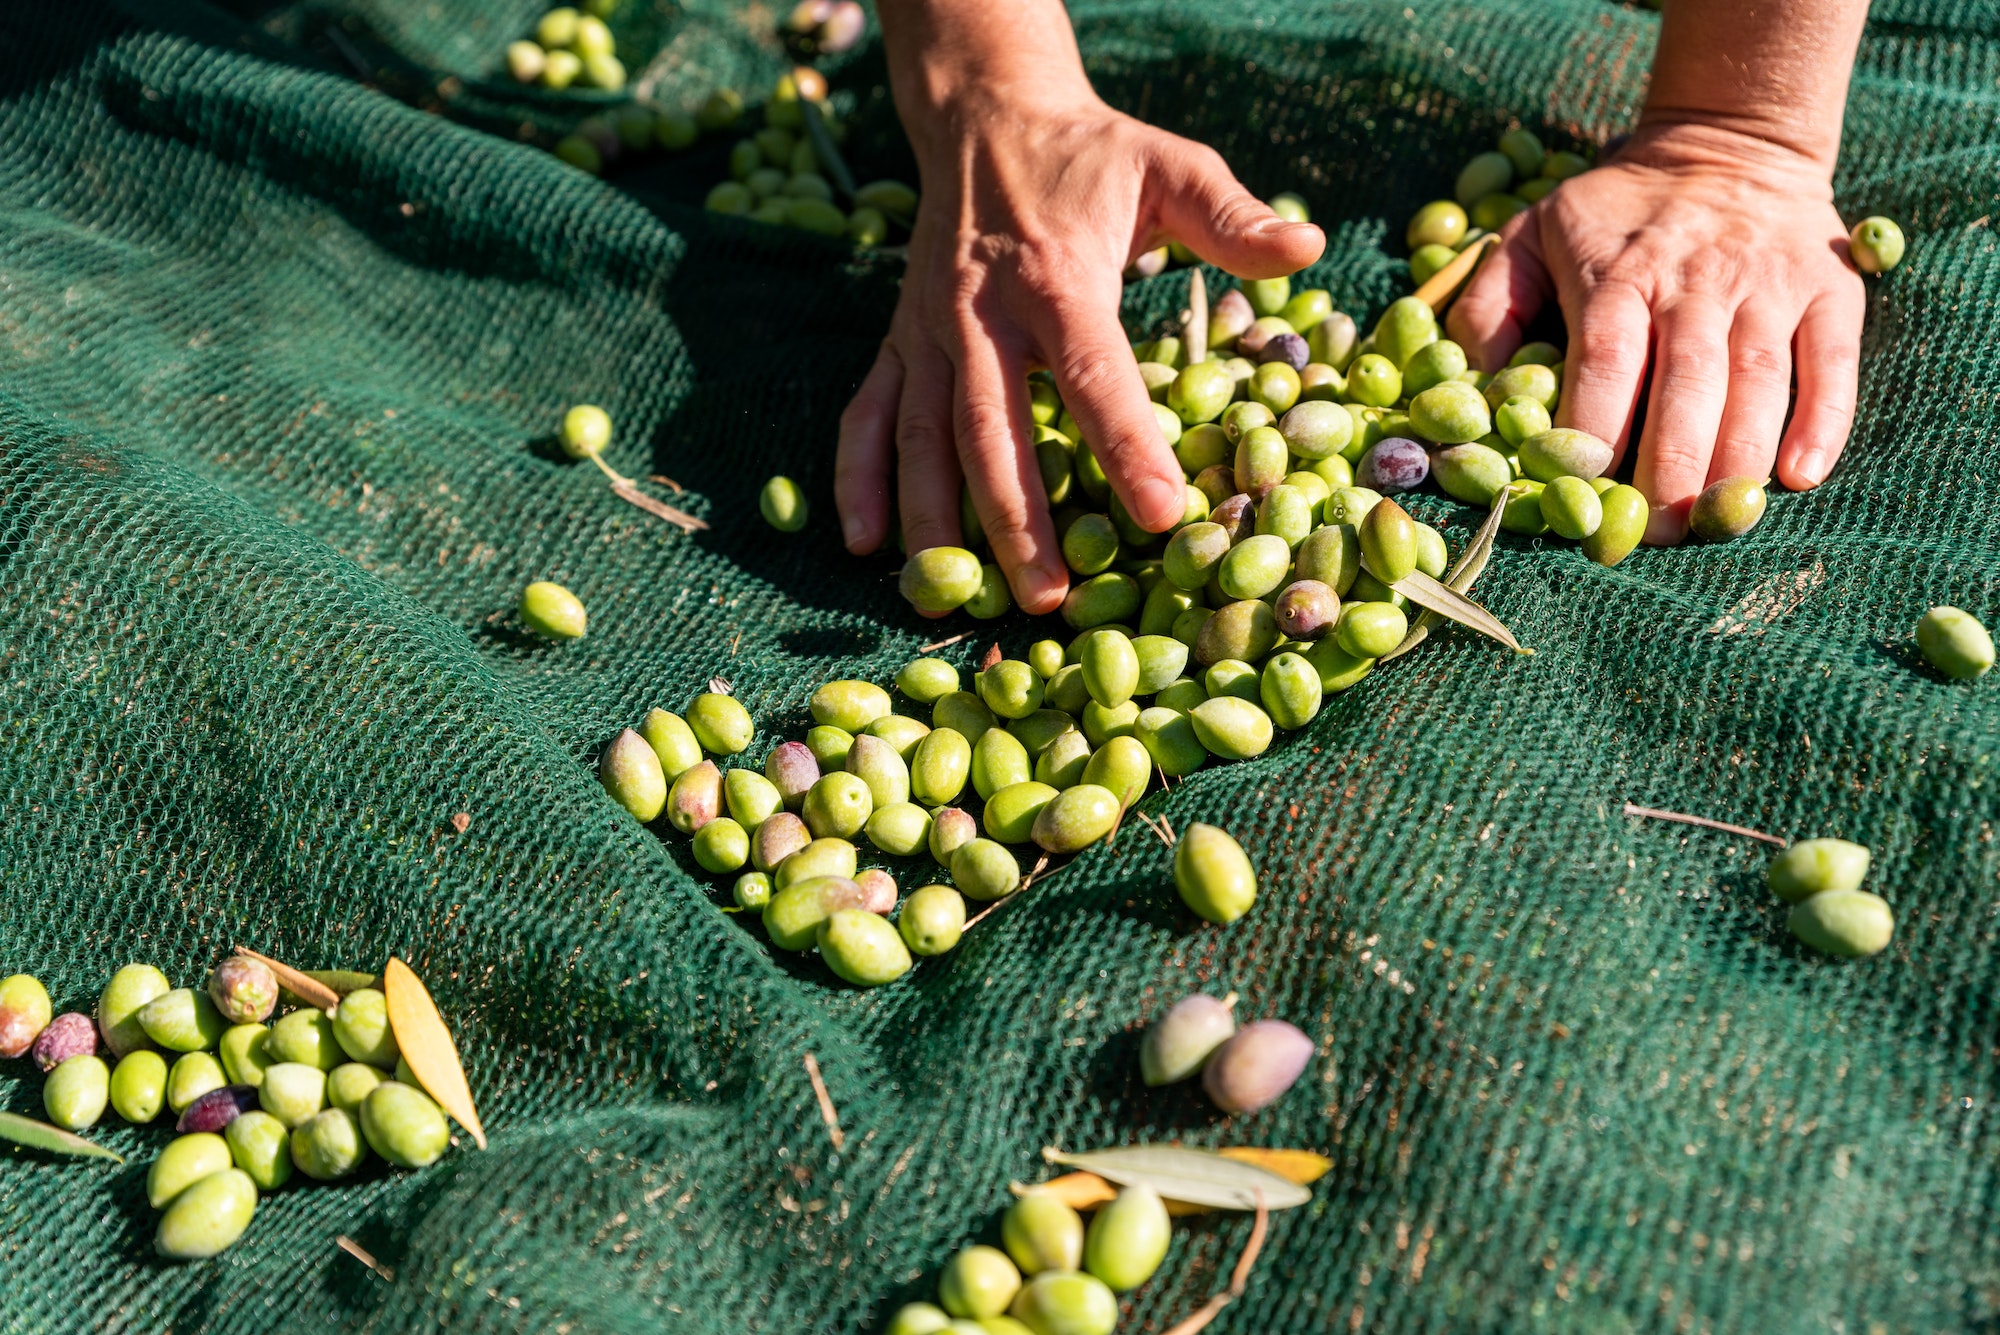 Woman hands are picking fallen olives from nets under olive trees